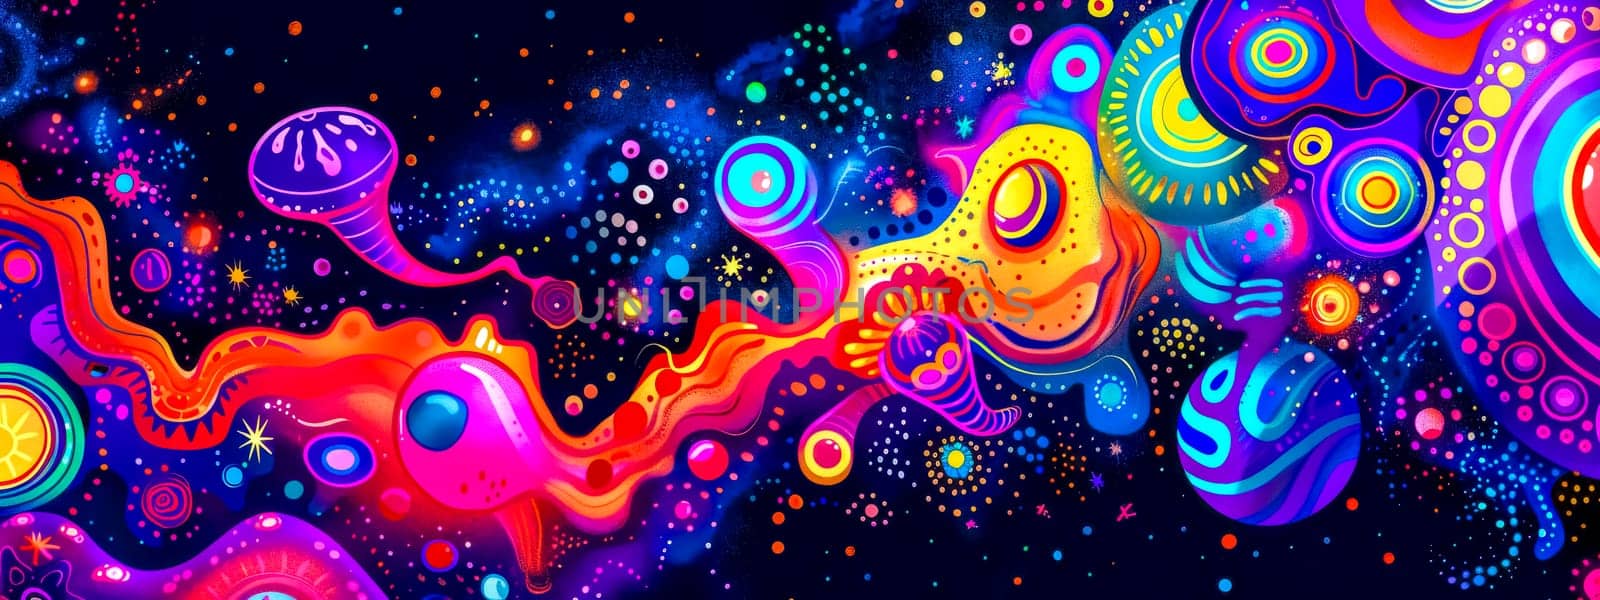 Vibrant, colorful artwork featuring abstract cosmic elements and patterns by Edophoto